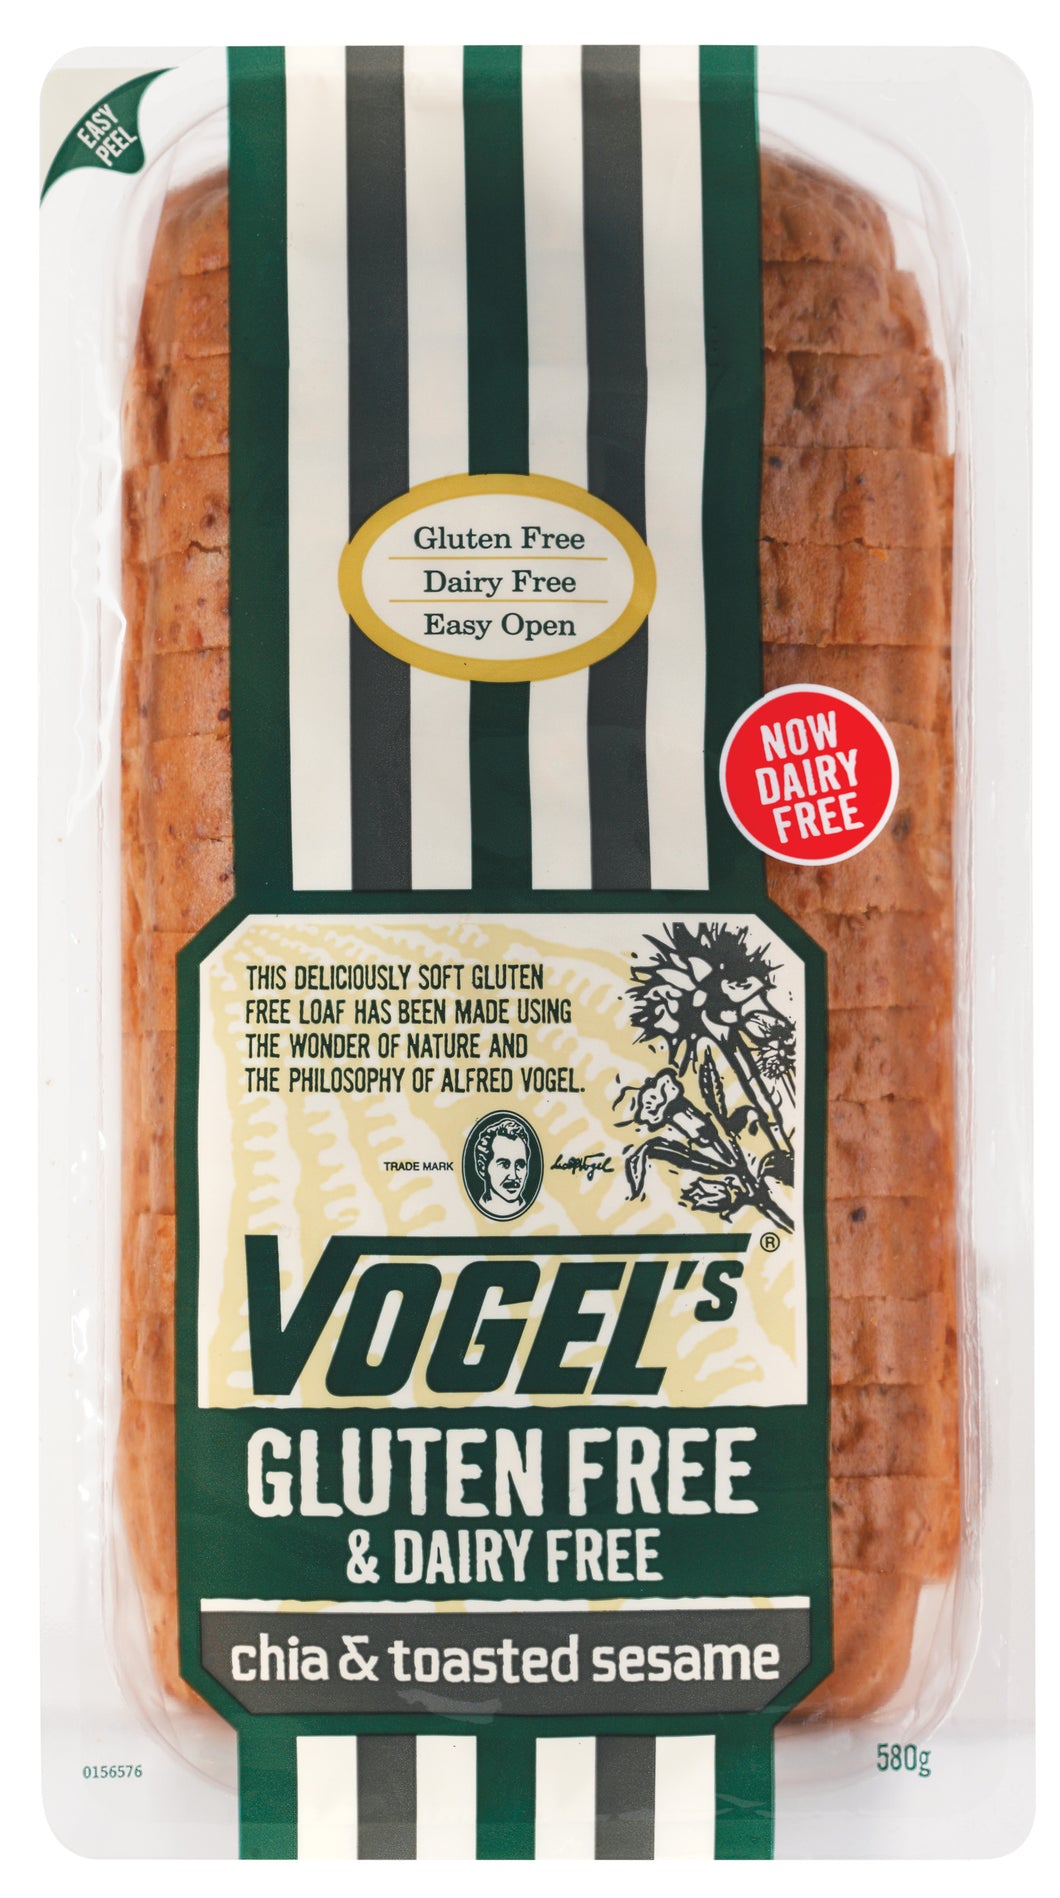 Vogel's Gluten Free Chia & Toasted Sesame Seed Bread